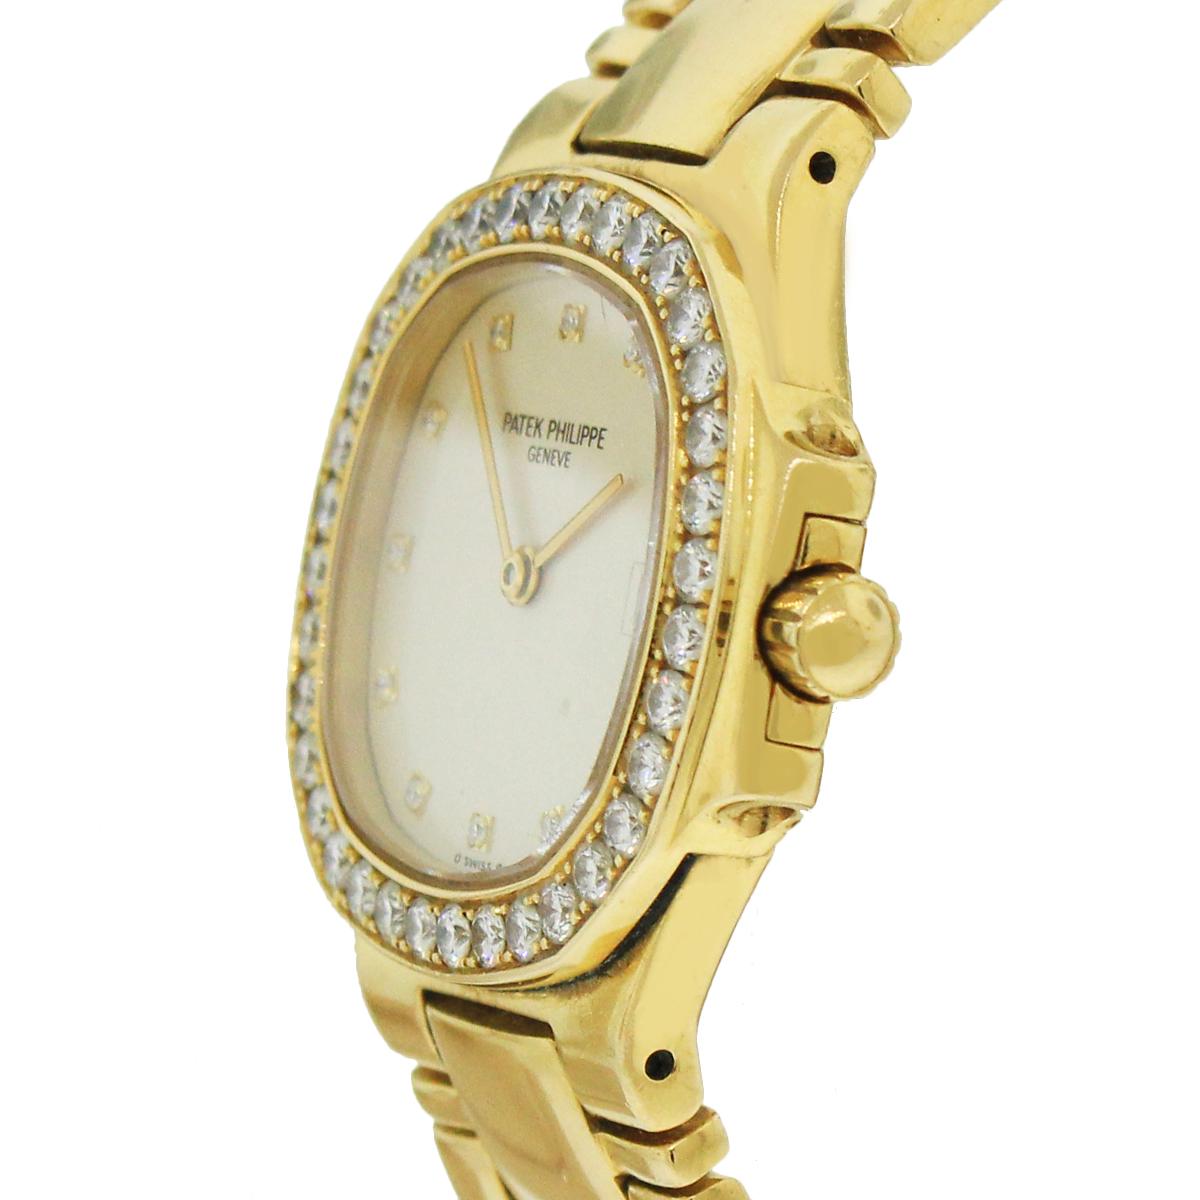 Brand: Patek Phillipe
MPN: 4700
Model: Nautilus
Case Material: 18k Yellow Gold
Crystal: Crystal
Bezel: 18k Yellow Gold diamond bezel. All original
Dial: Off White dial with diamond yellow gold hour markers and yellow gold hands. Date is displayed at